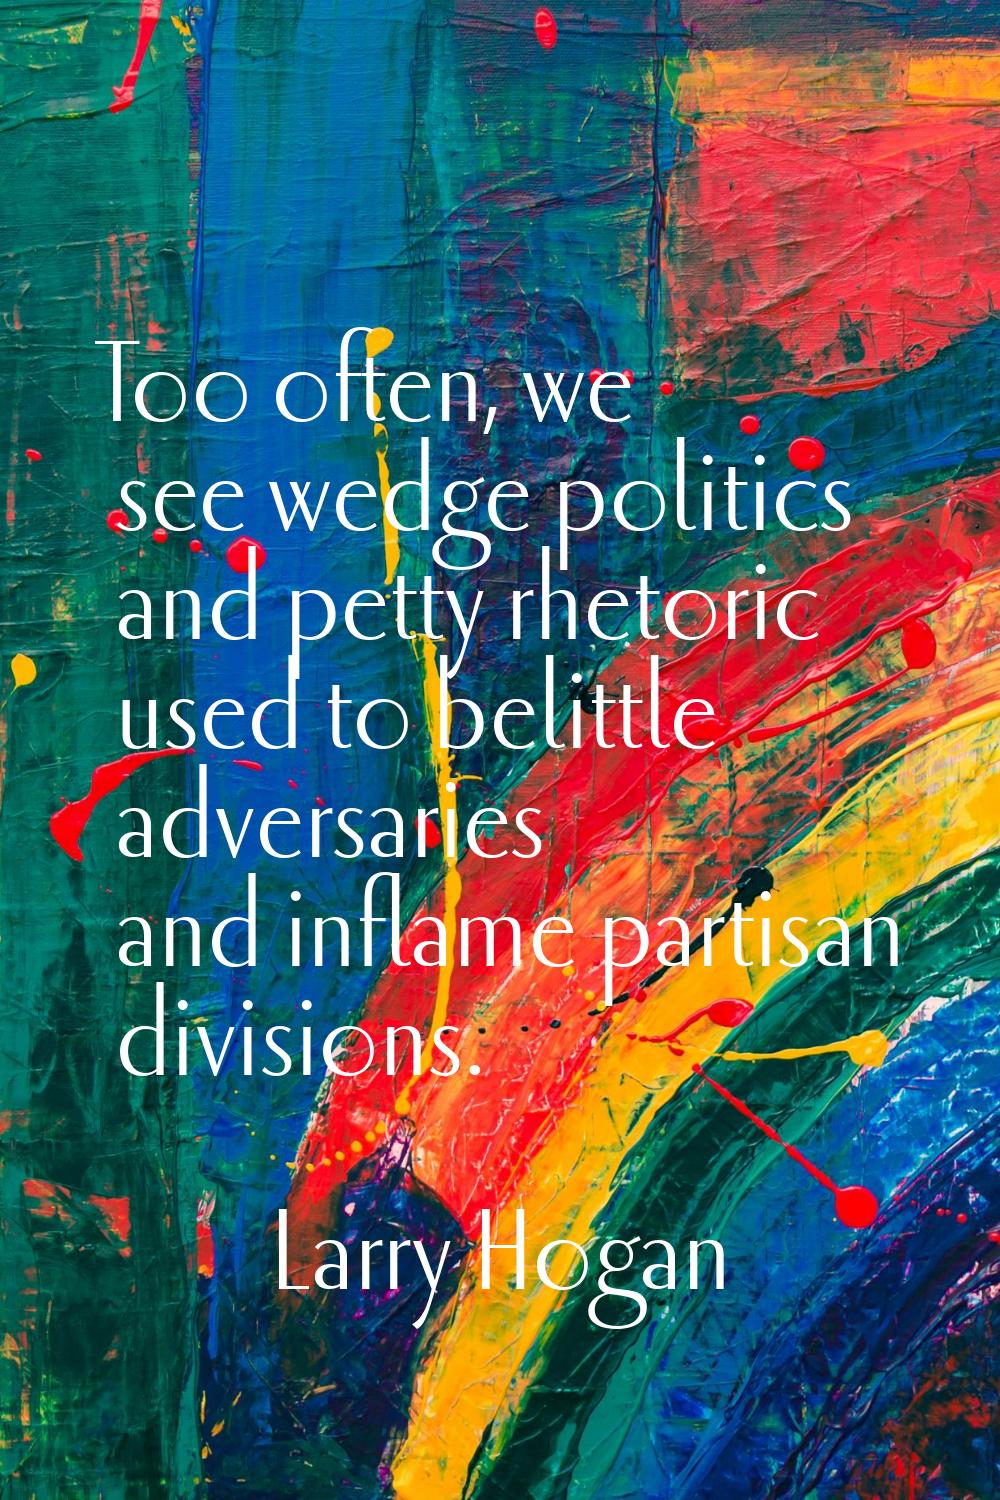 Too often, we see wedge politics and petty rhetoric used to belittle adversaries and inflame partis